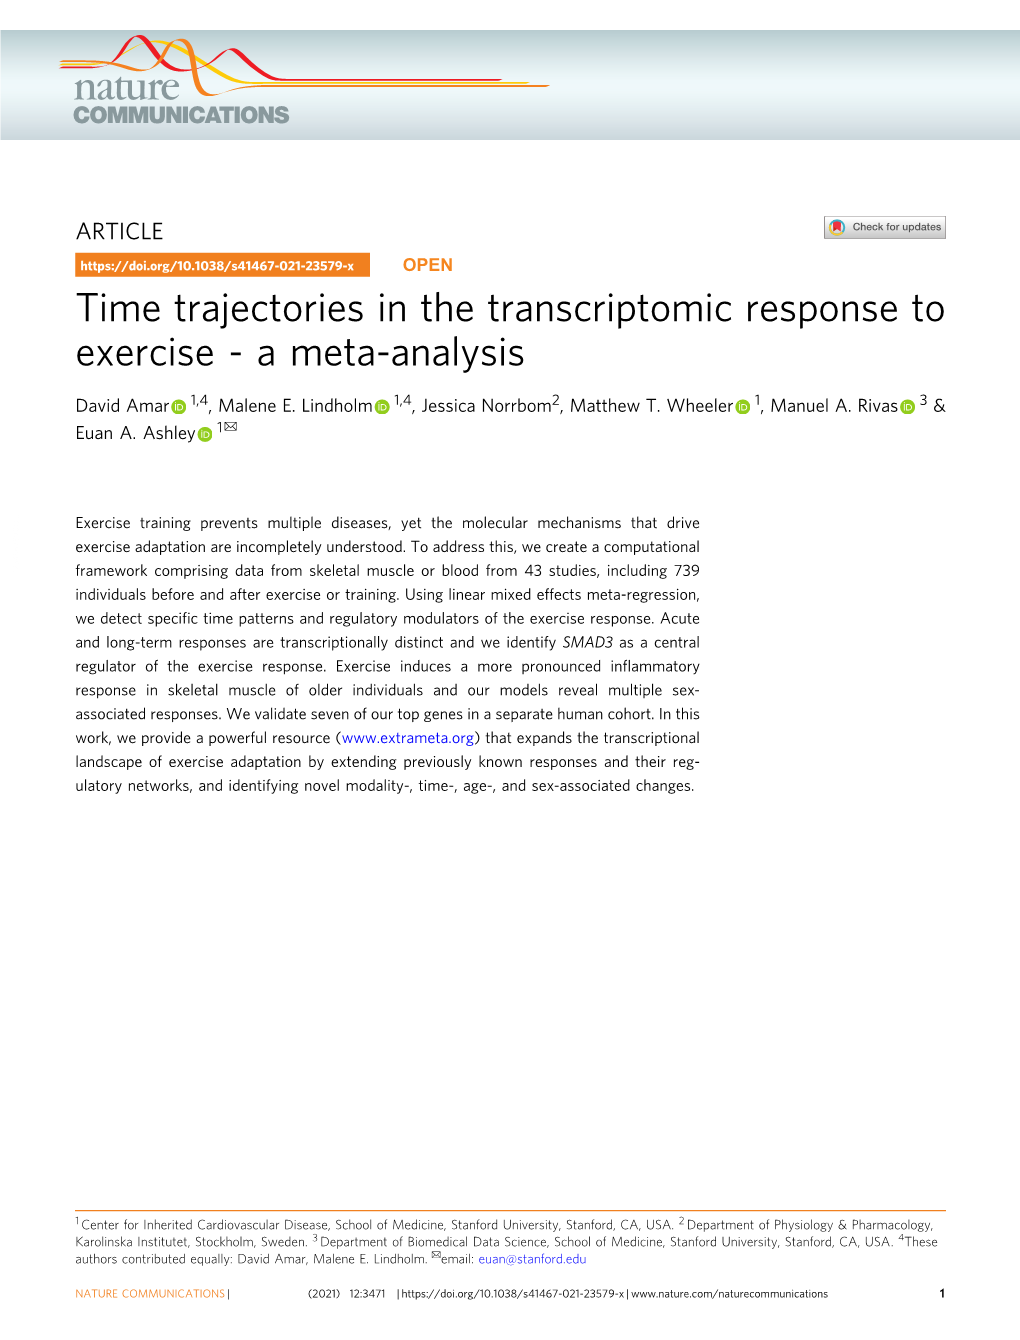 Time Trajectories in the Transcriptomic Response to Exercise - a Meta-Analysis